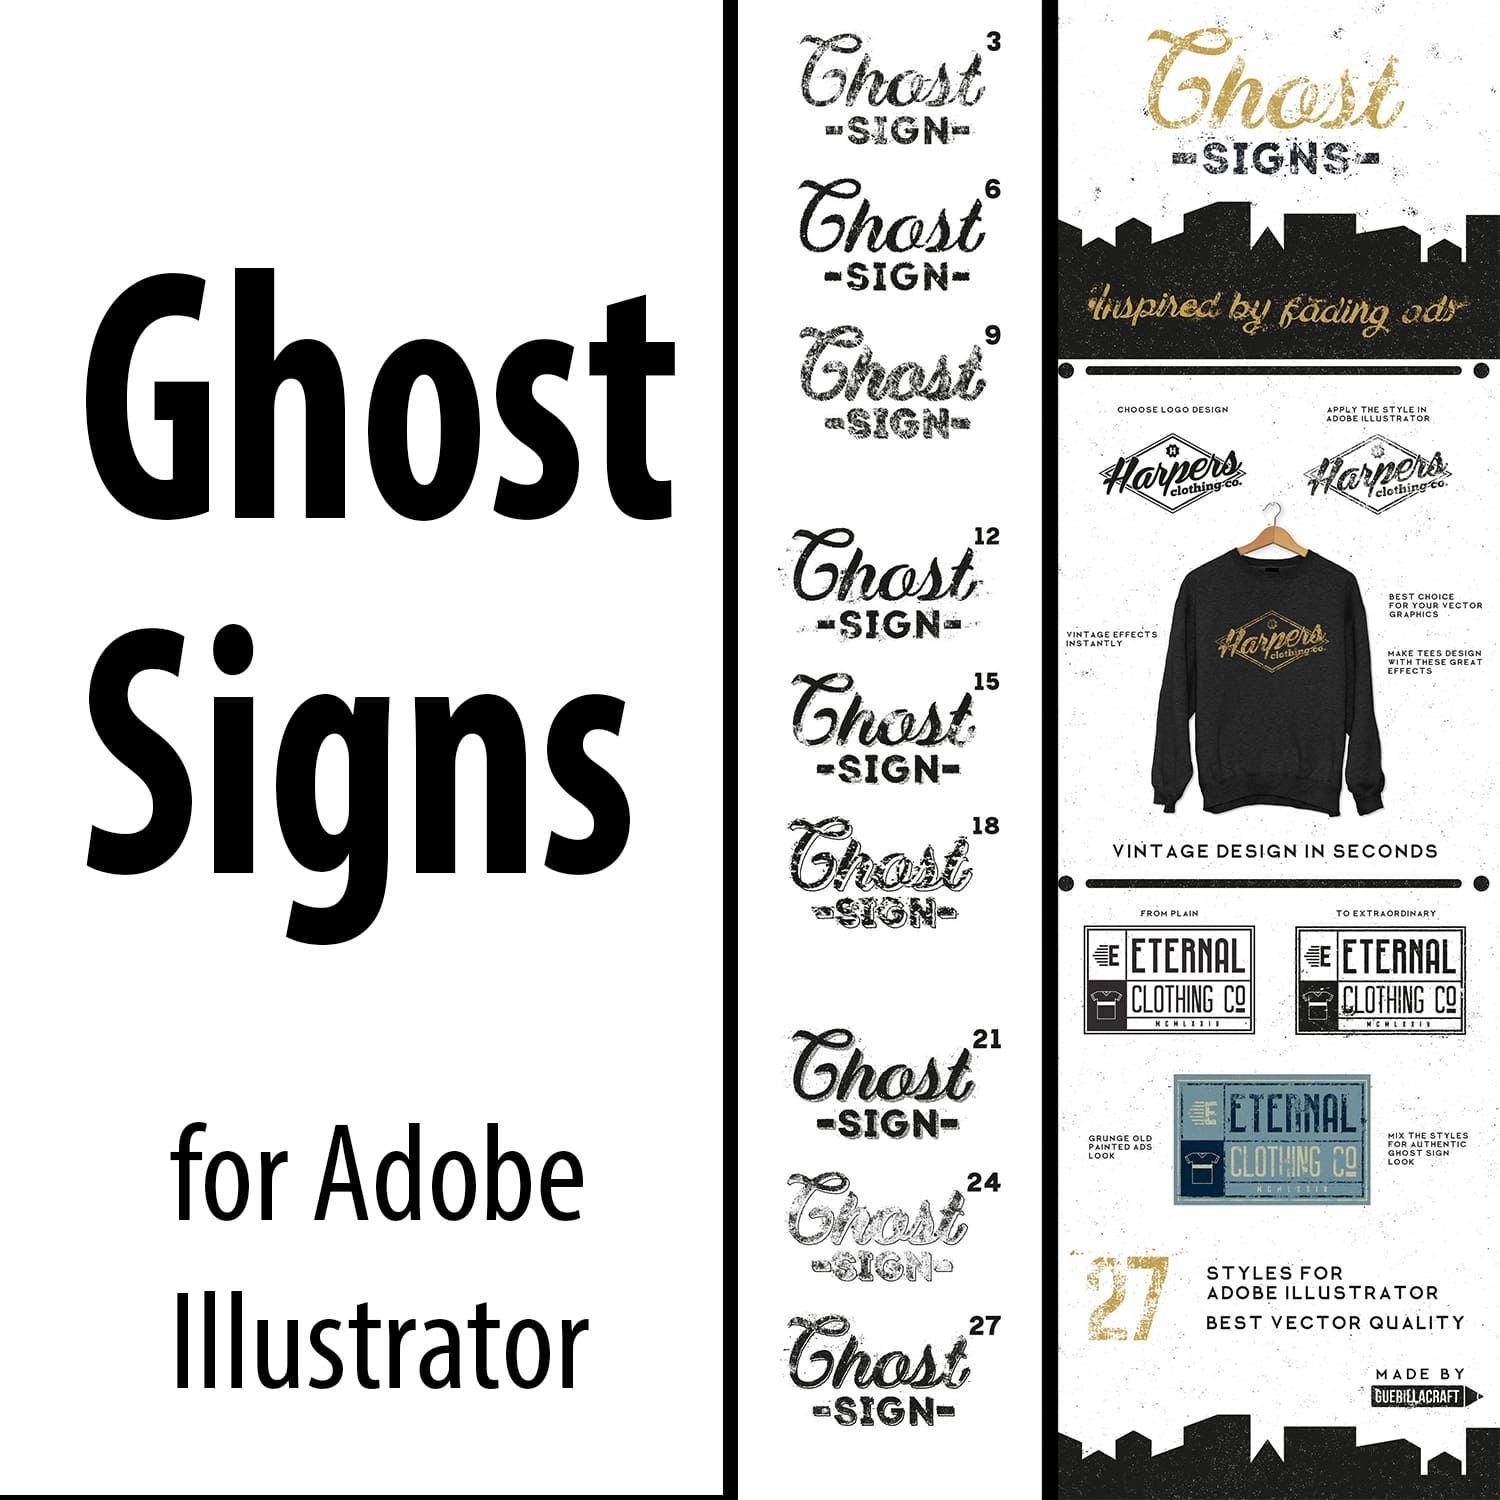 Ghost Signs for Adobe Illustrator by MasterBundles Collage Image.